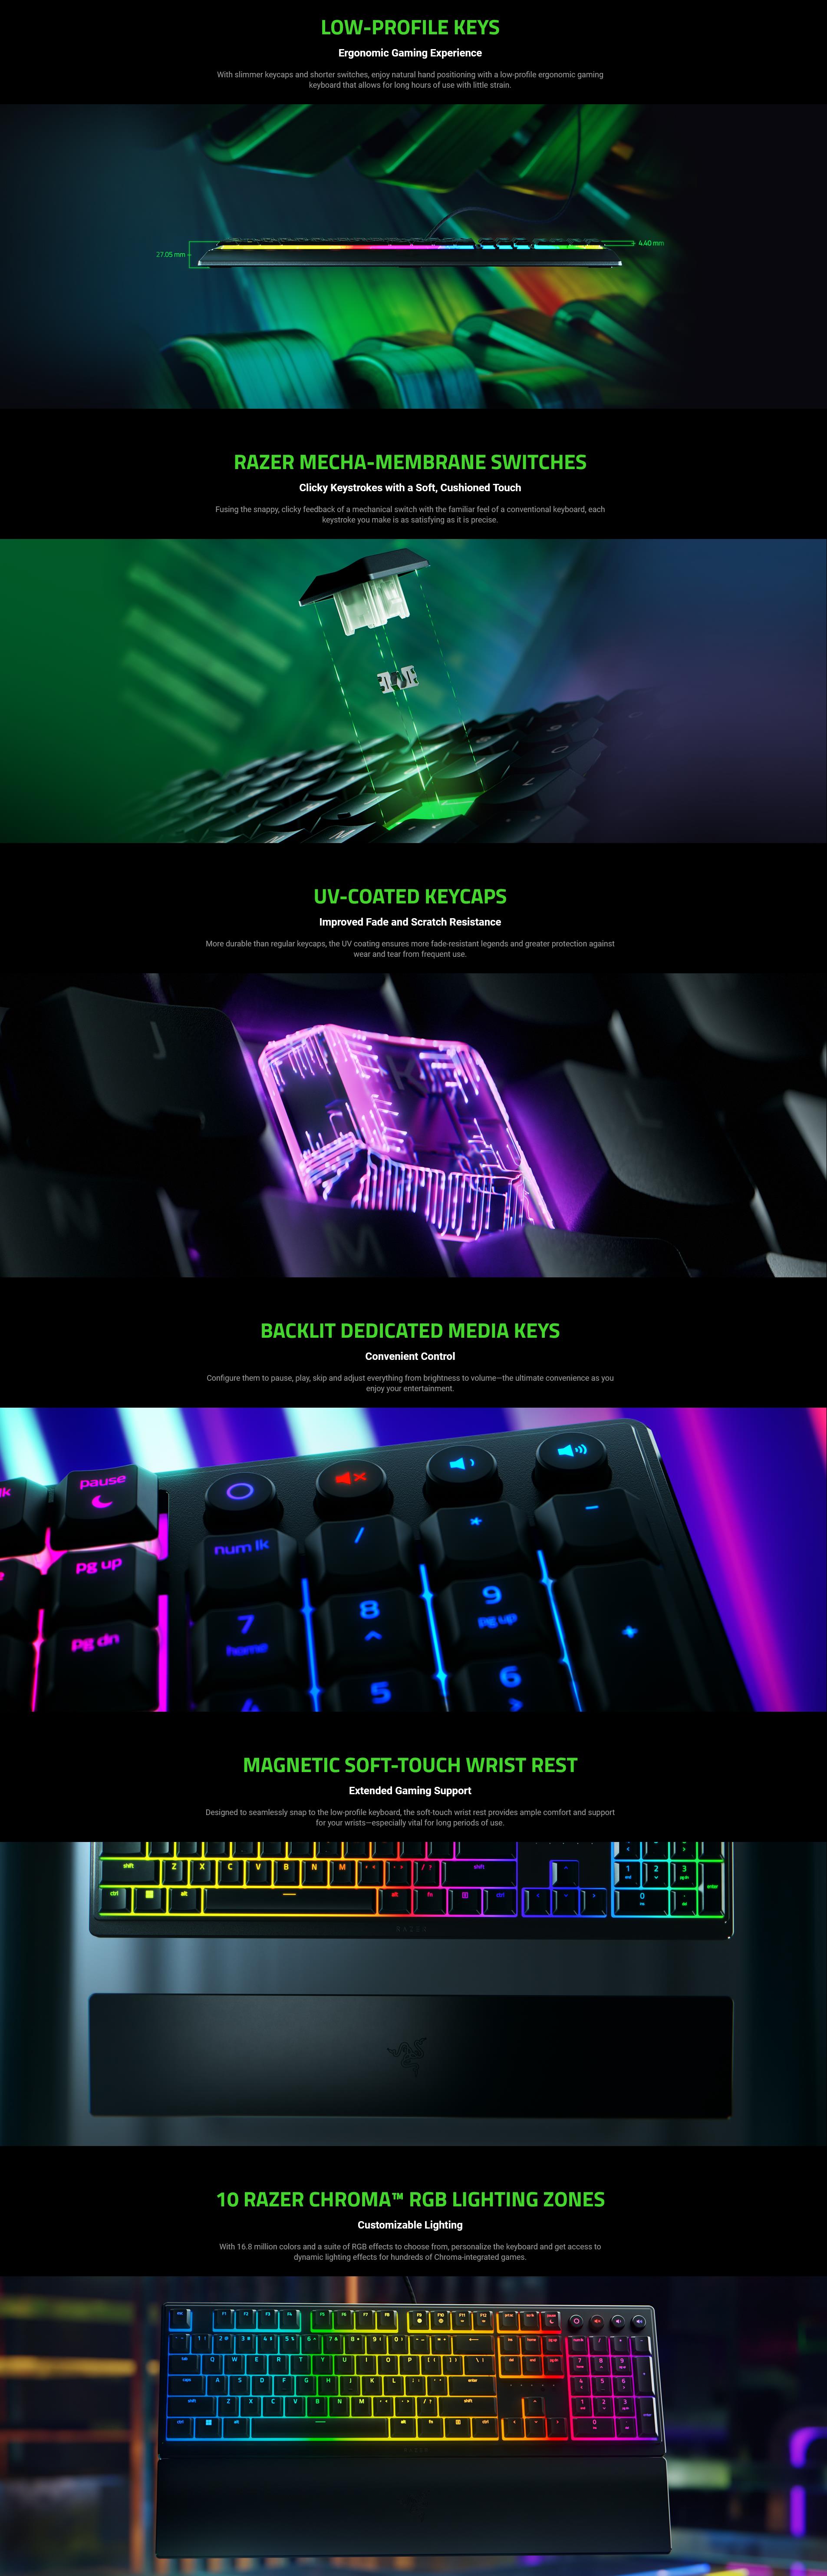 A large marketing image providing additional information about the product Razer Ornata V3 - Low Profile Gaming Keyboard - Additional alt info not provided